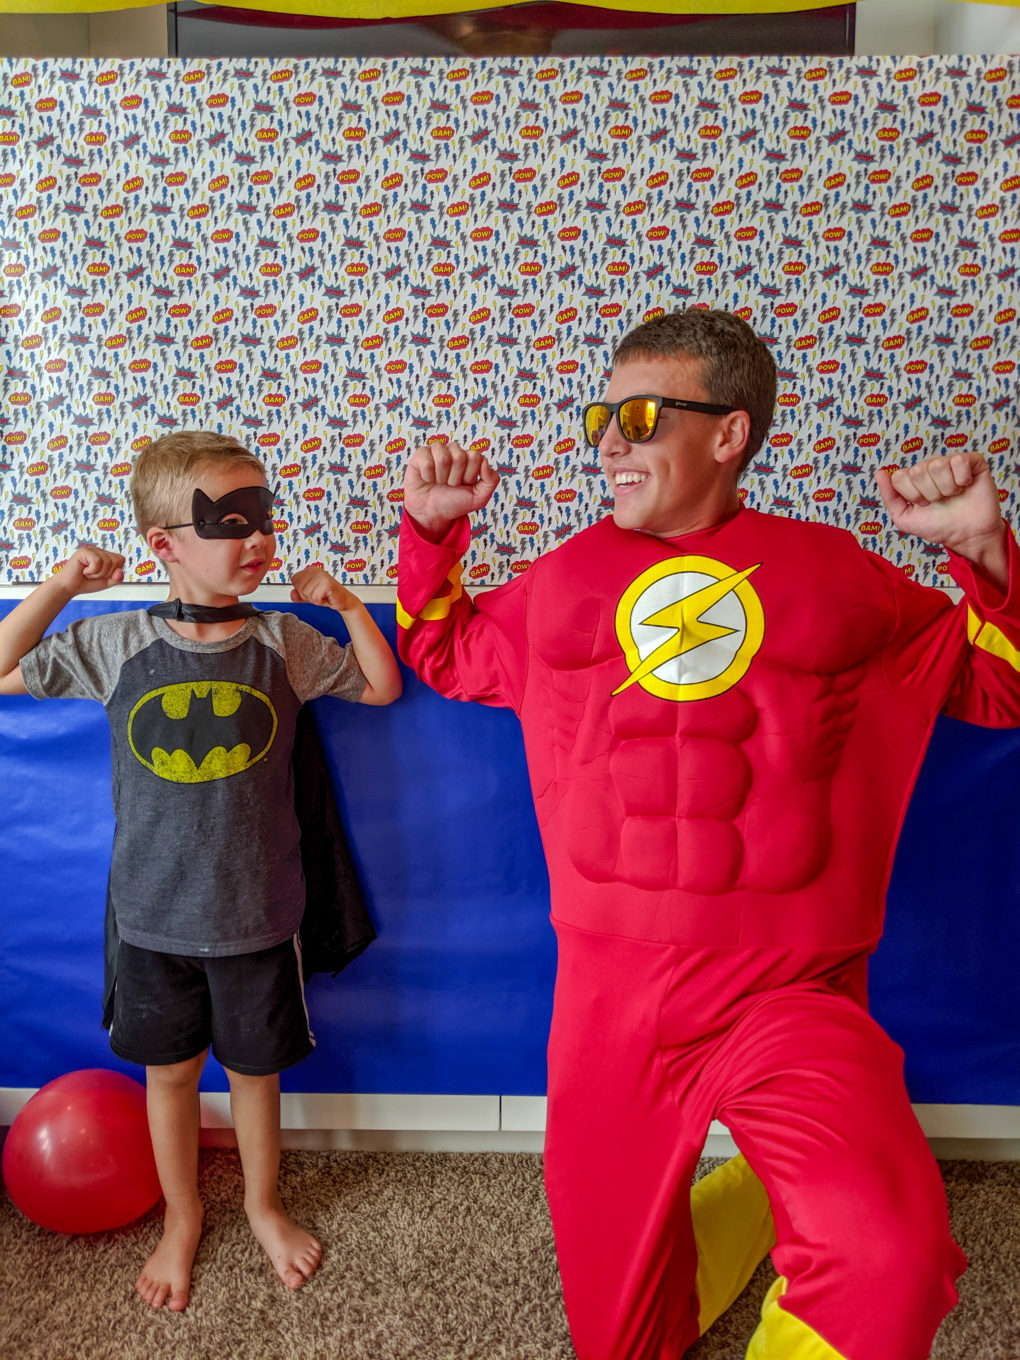 Superhero party activity - superhero appearance and photo op with the Flash.